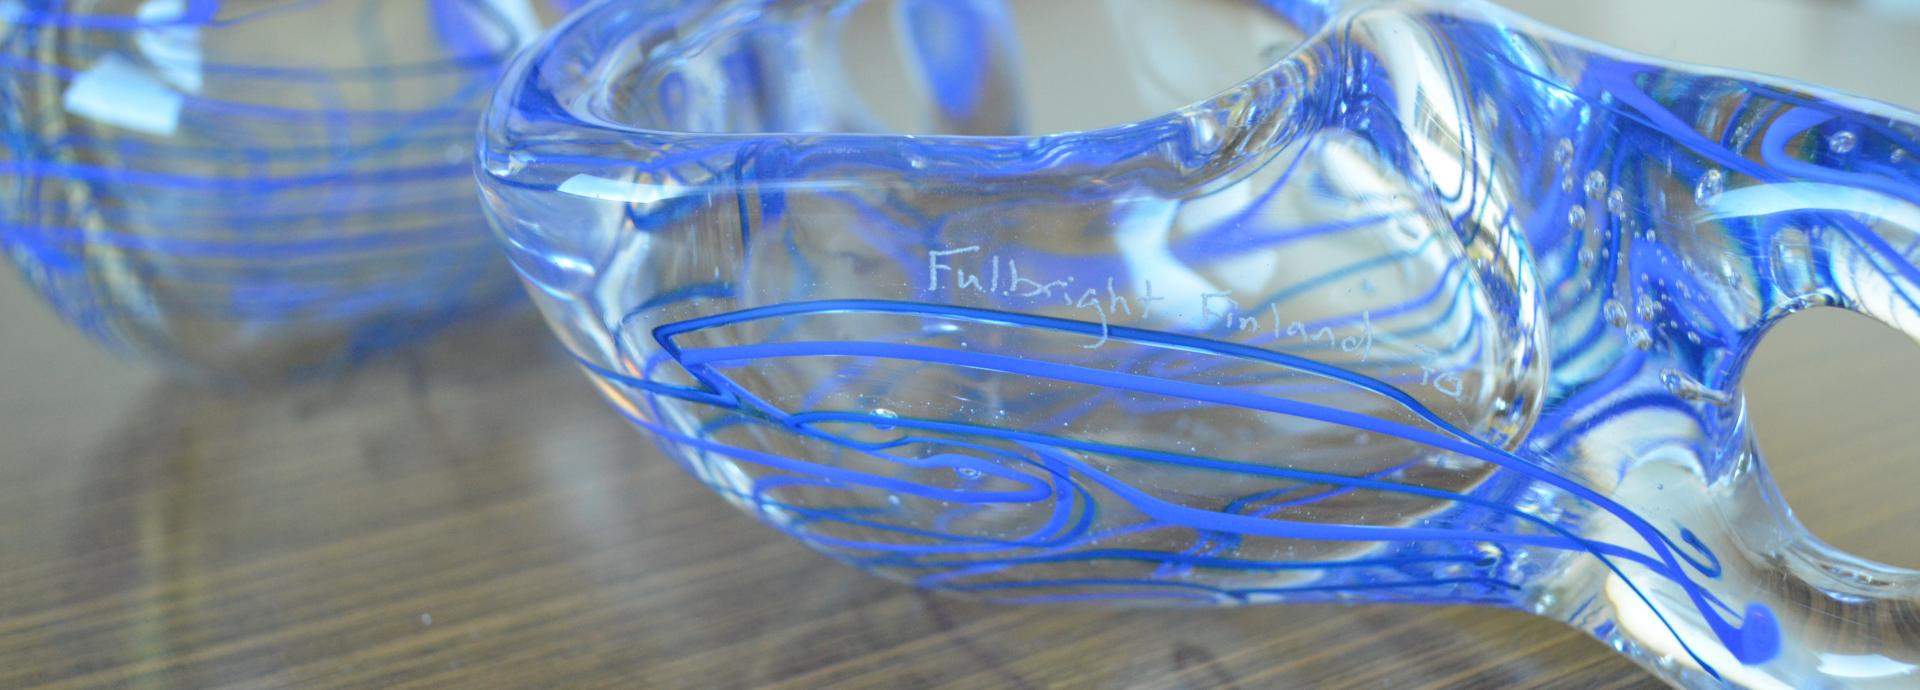 Two blue and white glass Kuksas on a table with "Fulbright Finland 70" carving on them